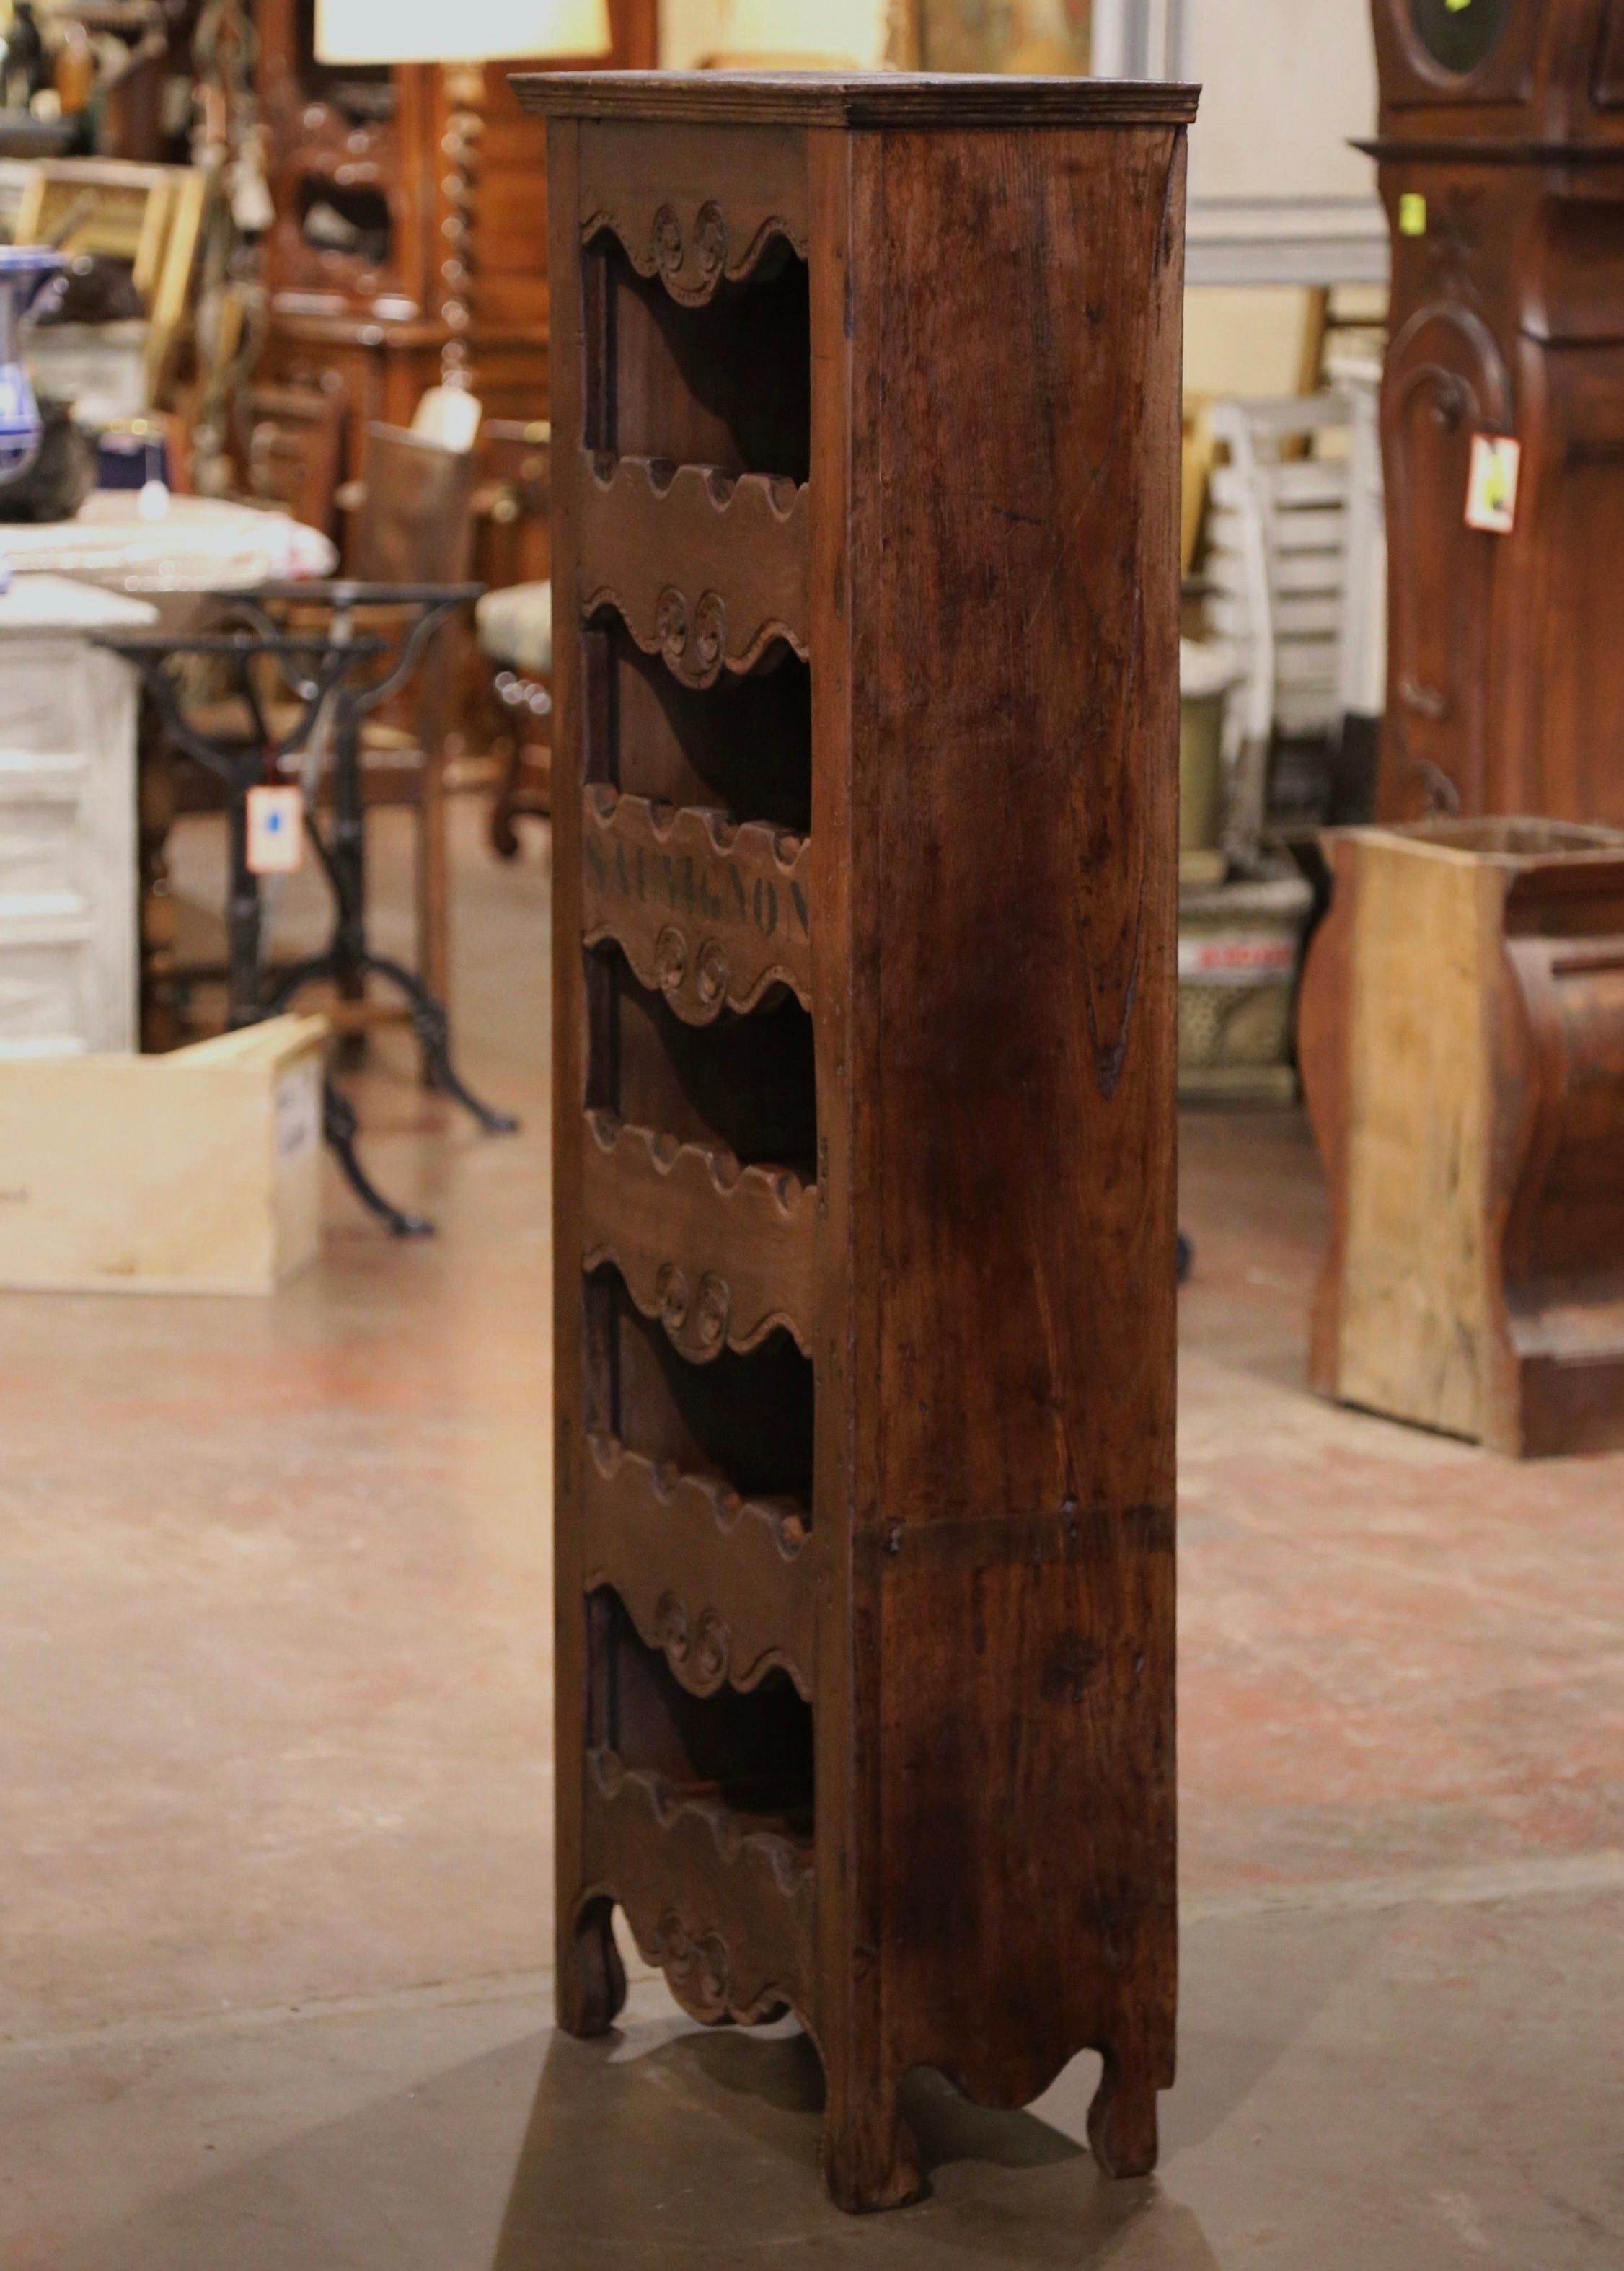 This narrow, antique wine storage cabinet was crafted in western France using old timber. Built of pine wood, the tall and thin cabinet sits on four small scroll feet under a scalloped apron. The piece features five shelves embellished with